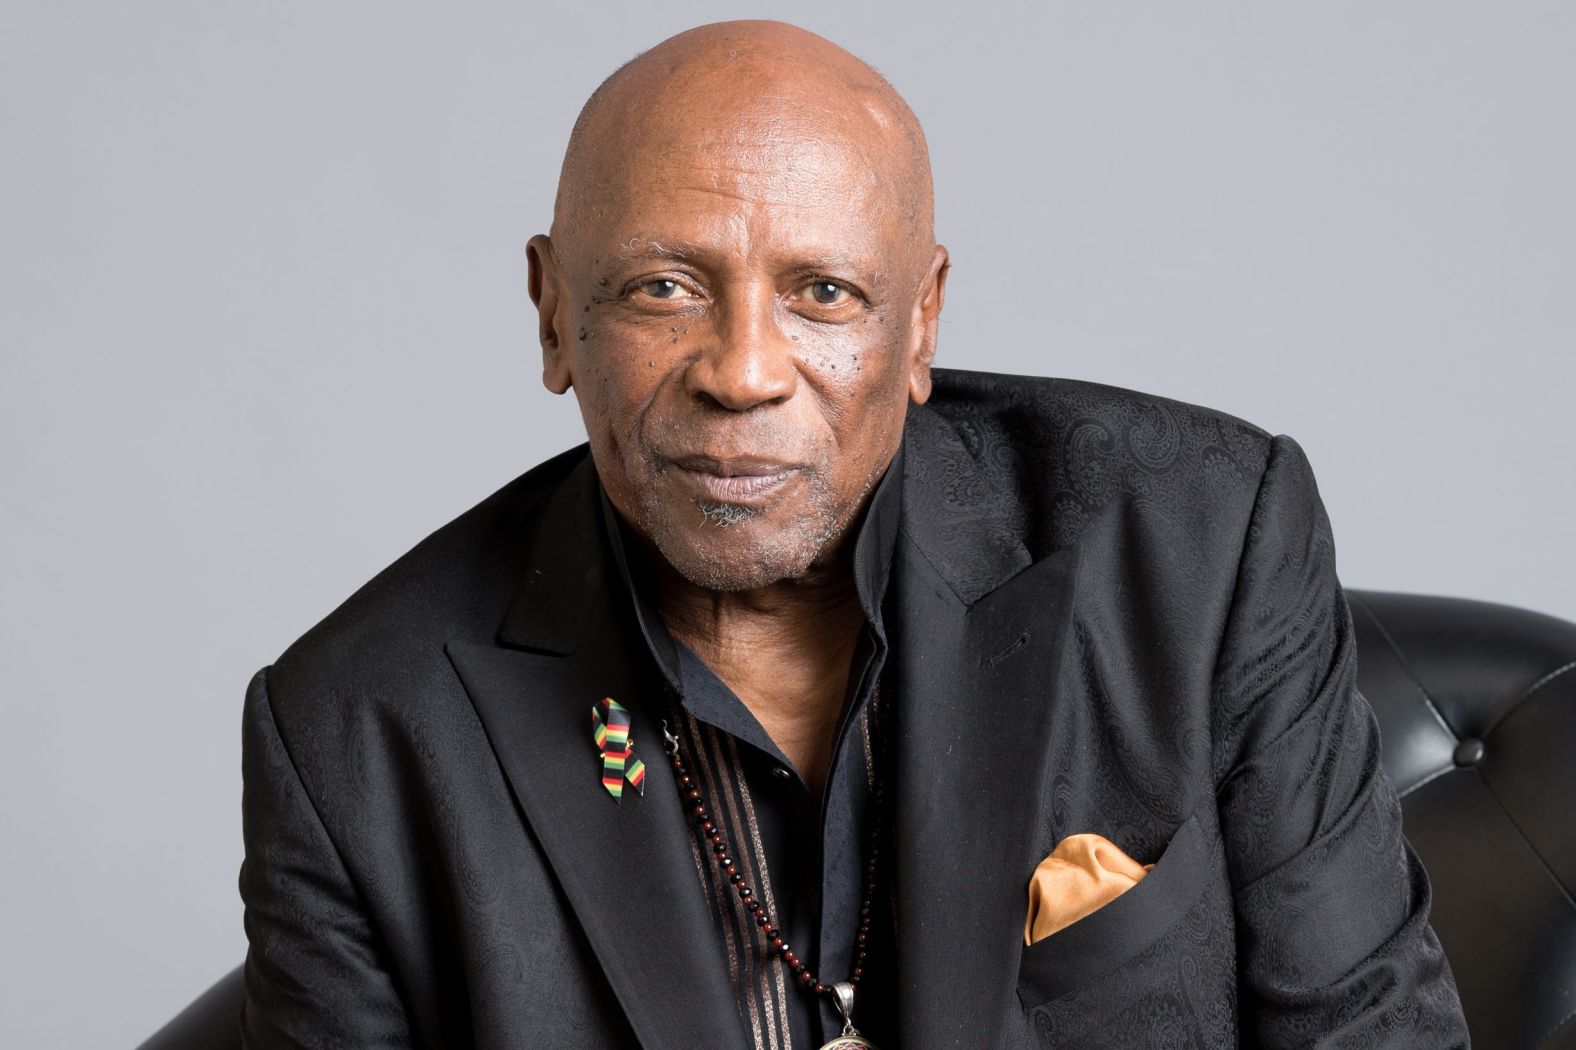 <a href="index.php?page=&url=https%3A%2F%2Fwww.cnn.com%2F2024%2F03%2F29%2Fentertainment%2Flouis-gossett-jr-death%2Findex.html" target="_blank">Louis Gossett Jr.</a>, a star of film and television who won an Academy Award for his performance in "An Officer and a Gentleman," died on March 29, according to a statement from his family. He was 87.